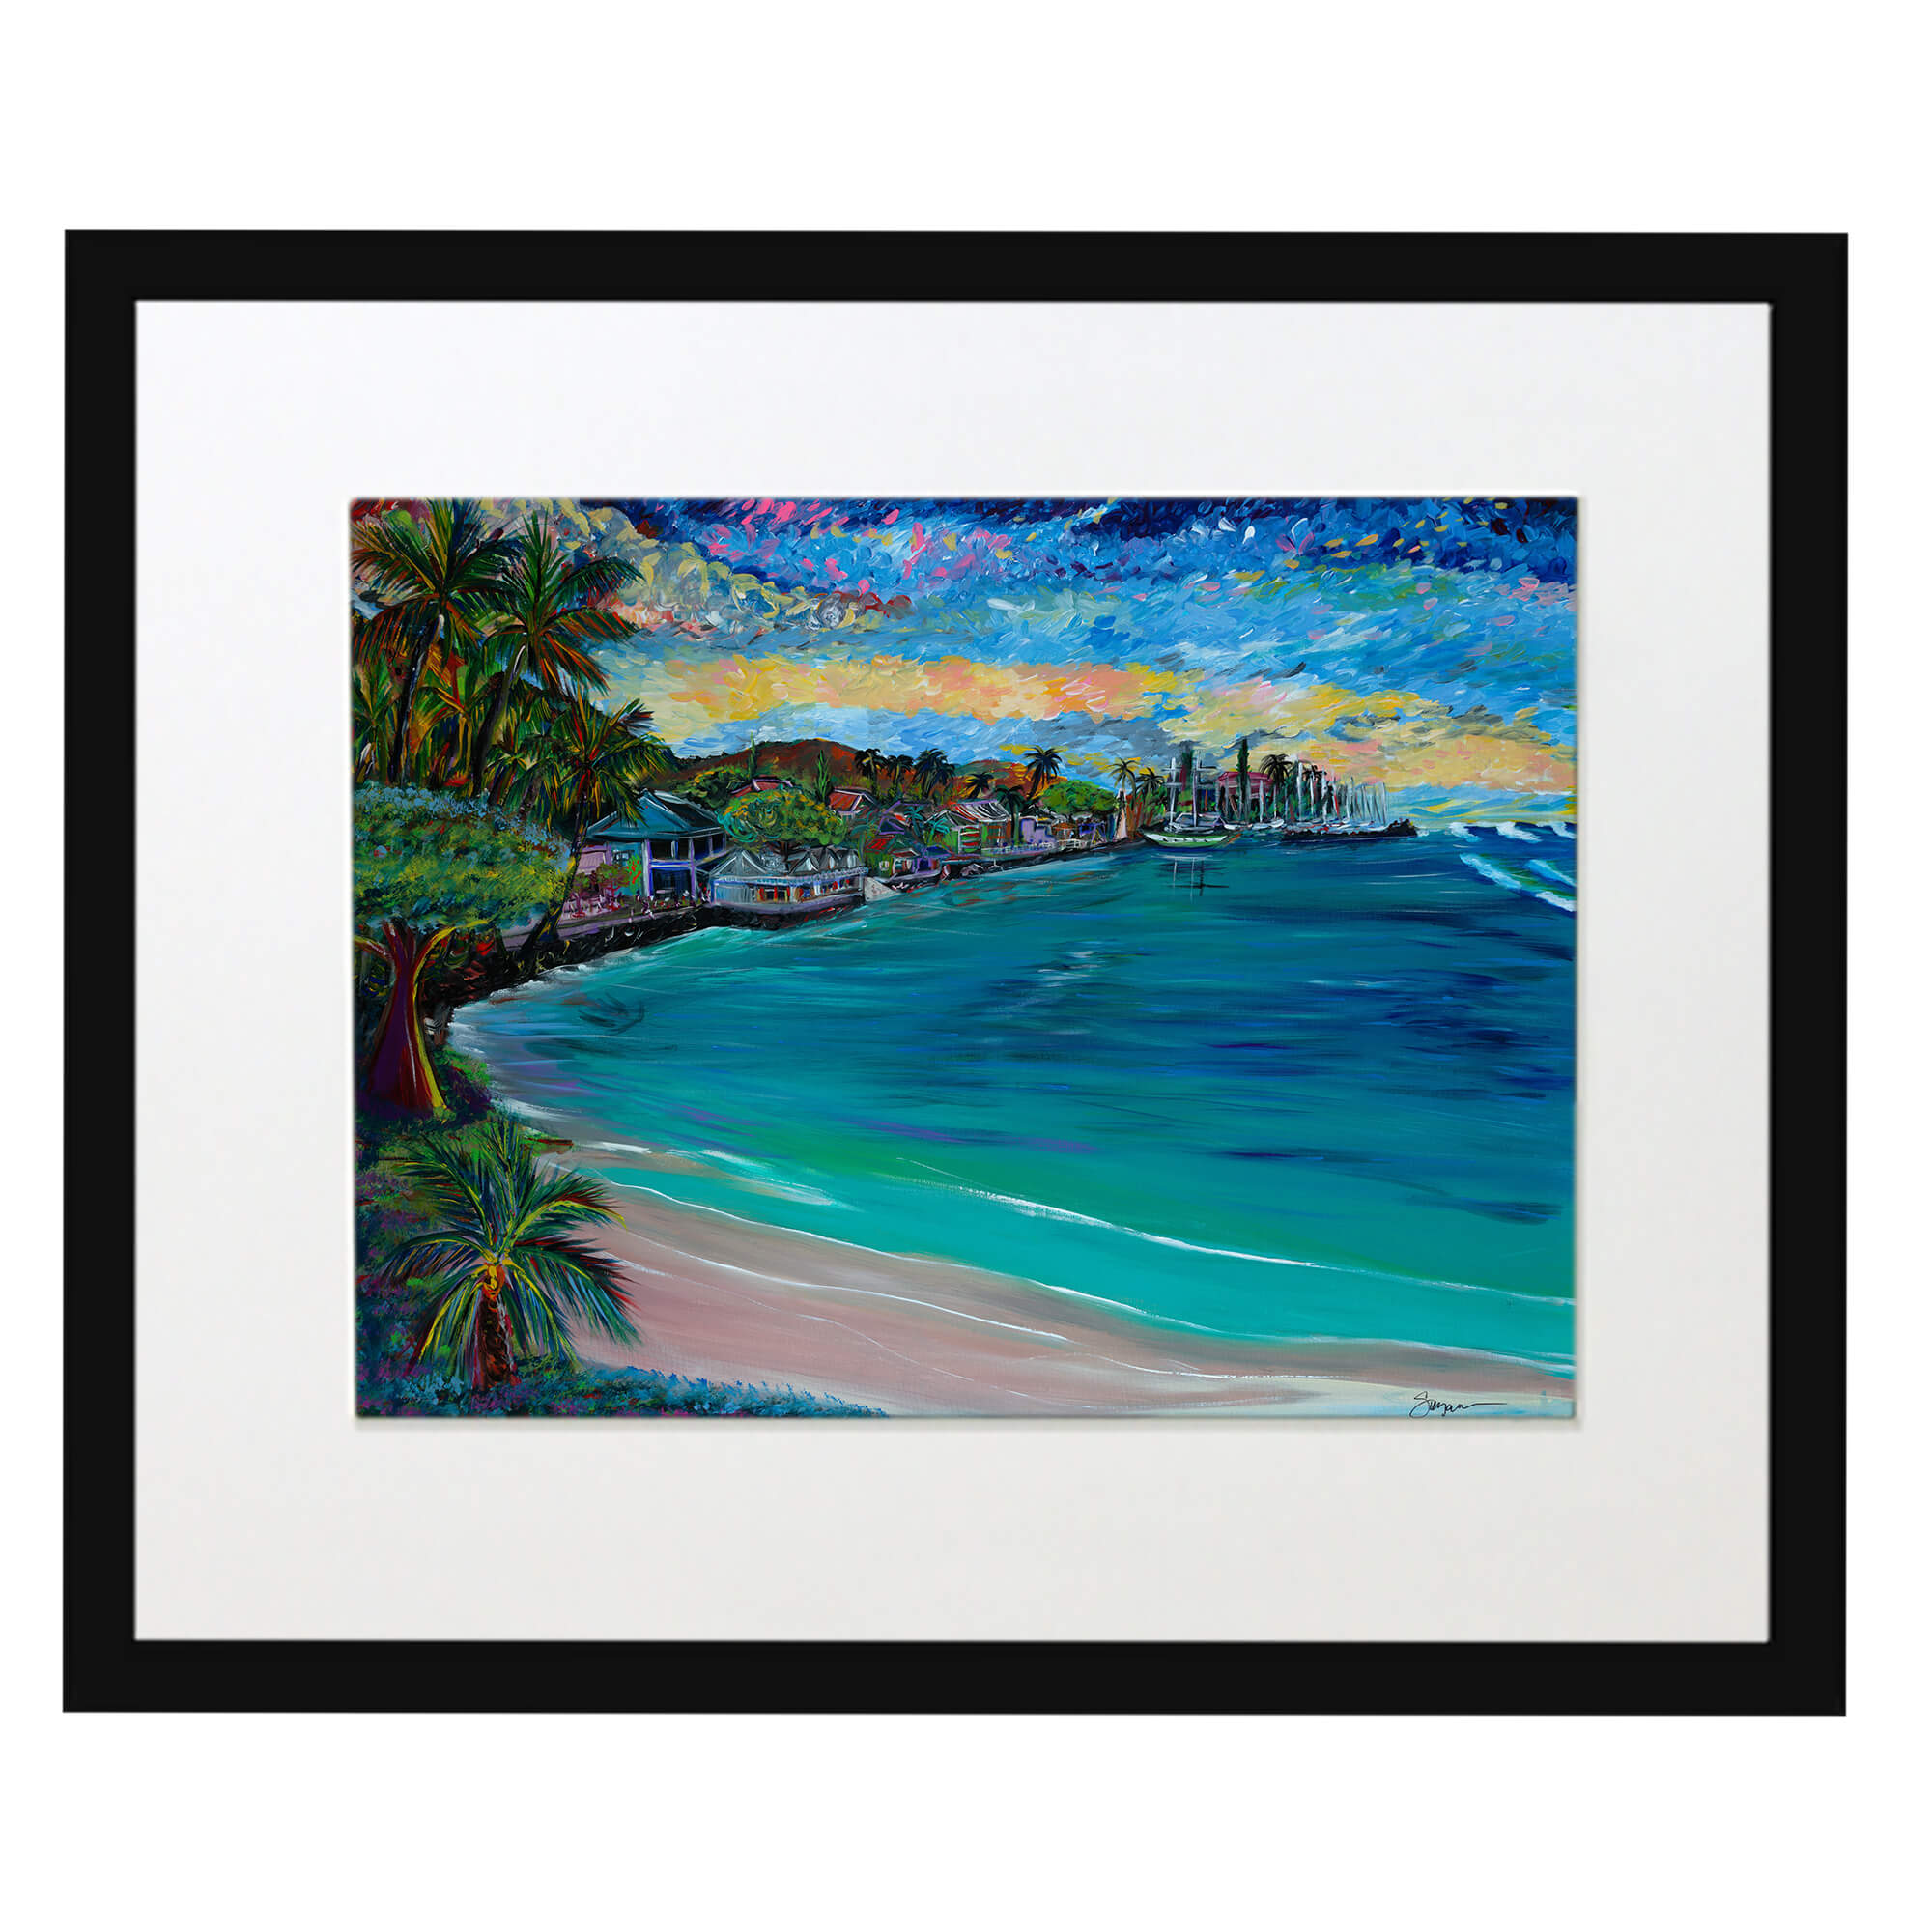 Matted art print with black frame featuring palm trees on the sand bed  by hawaii artist Suzanne MacAdam